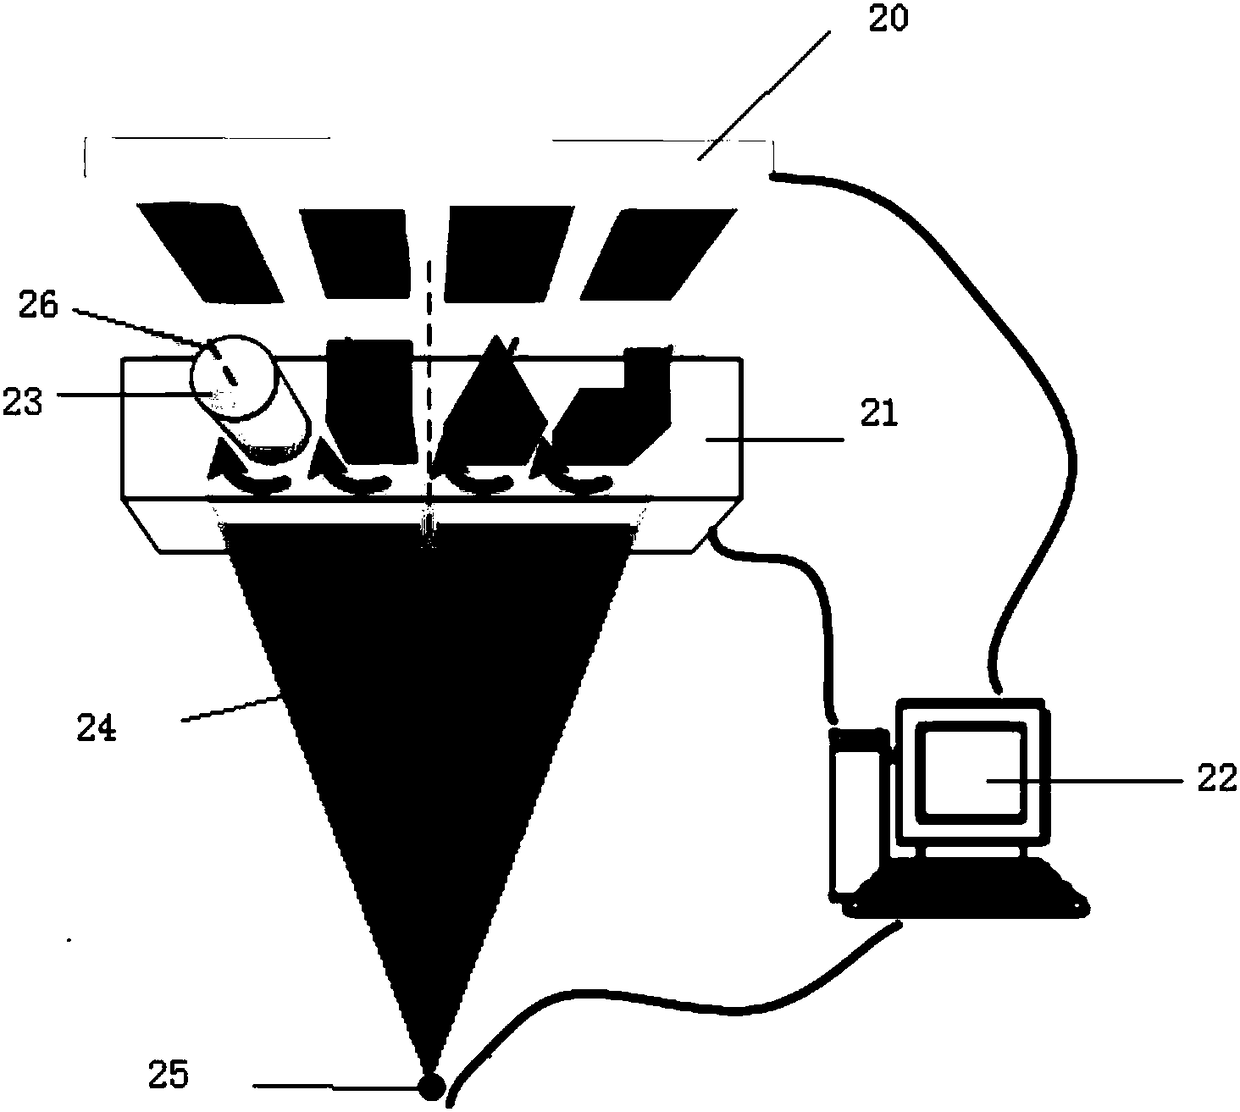 Three-dimensional cone-beam computed tomography imaging method and device